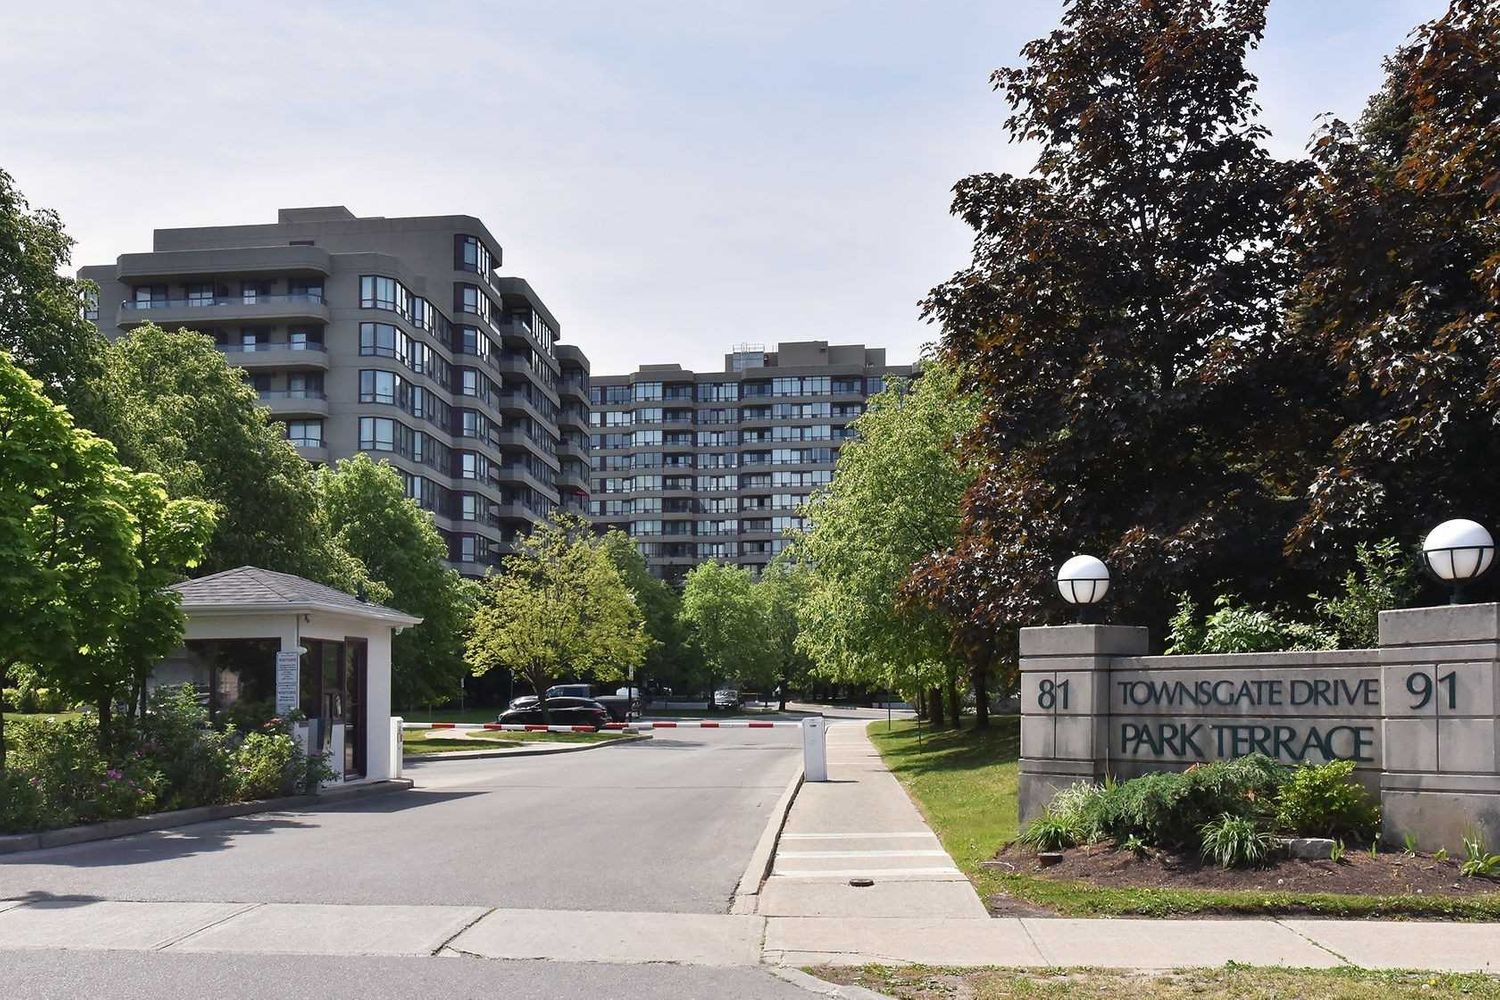 91 Townsgate Drive. Park Terrace II Condos is located in  Vaughan, Toronto - image #3 of 3